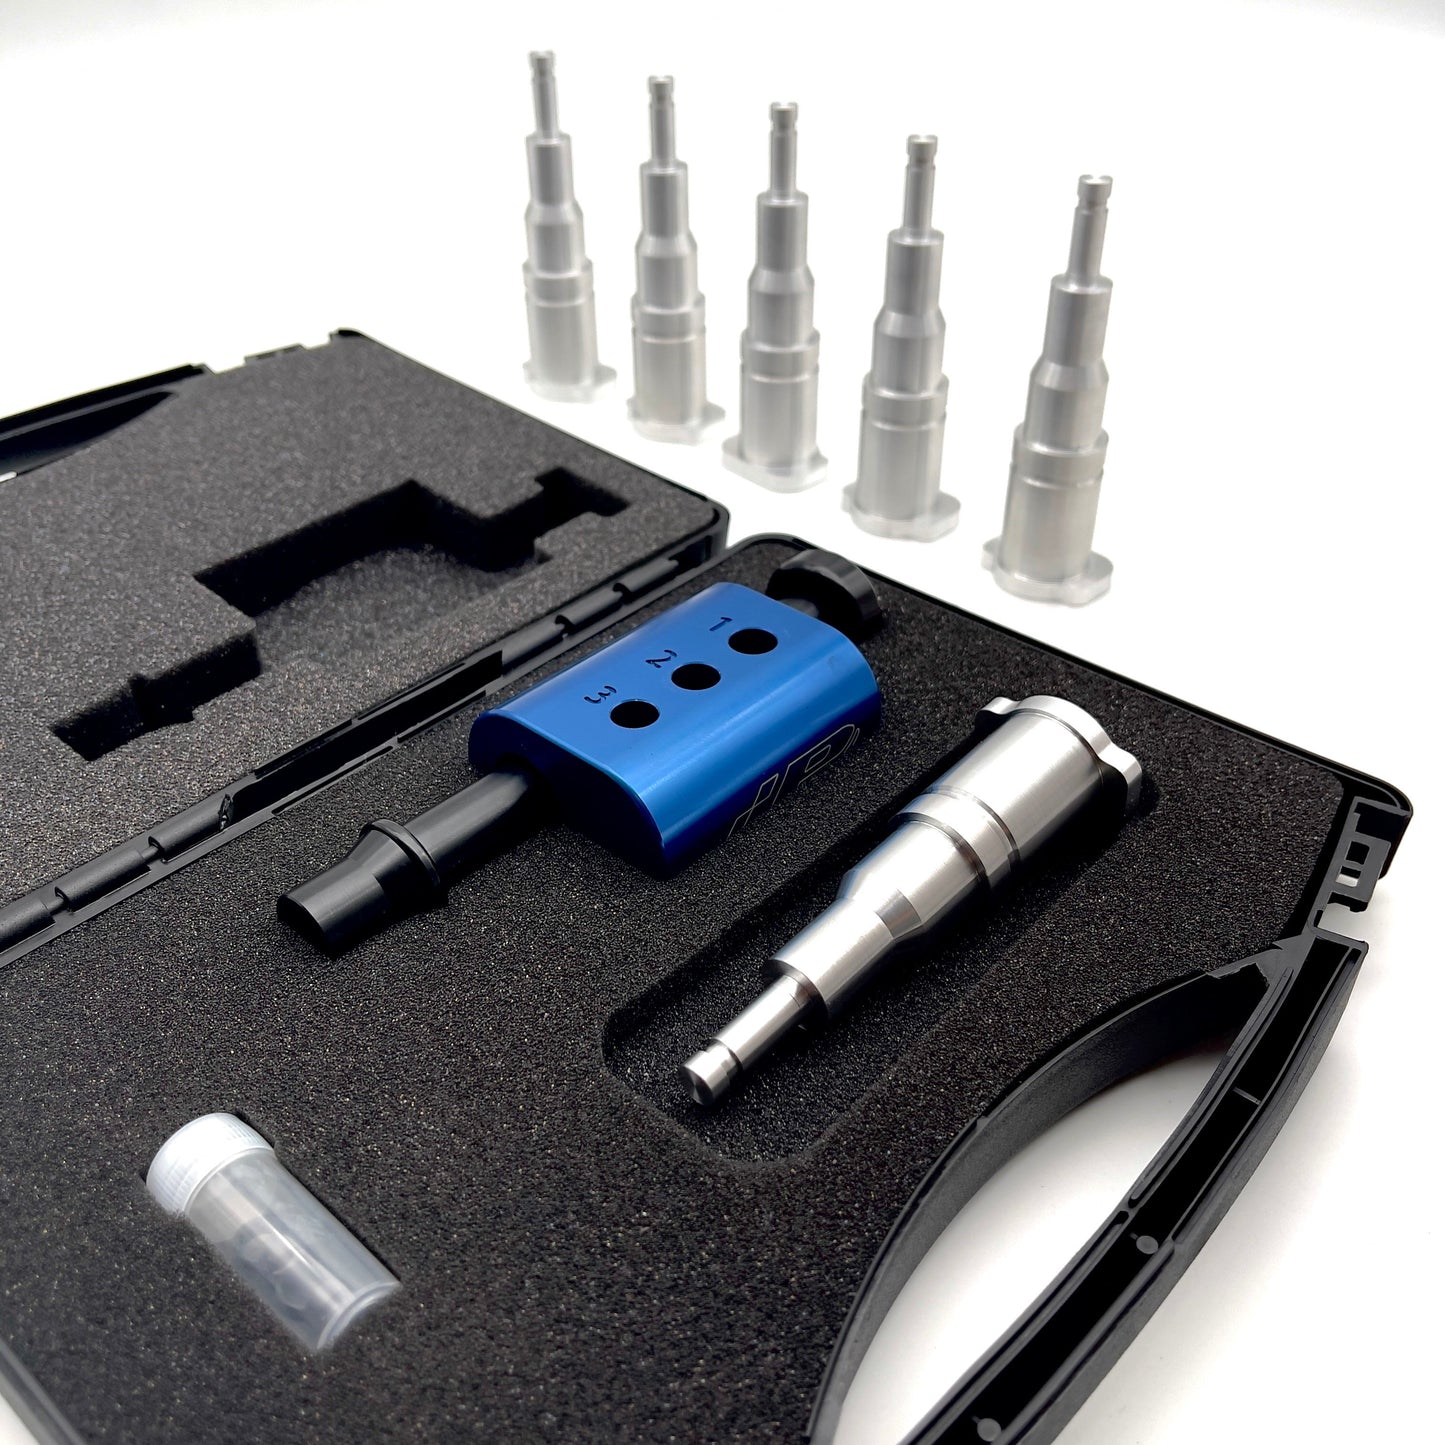 bmw and fuel pump removal tools - Buy bmw and fuel pump removal tools at  Best Price in Malaysia